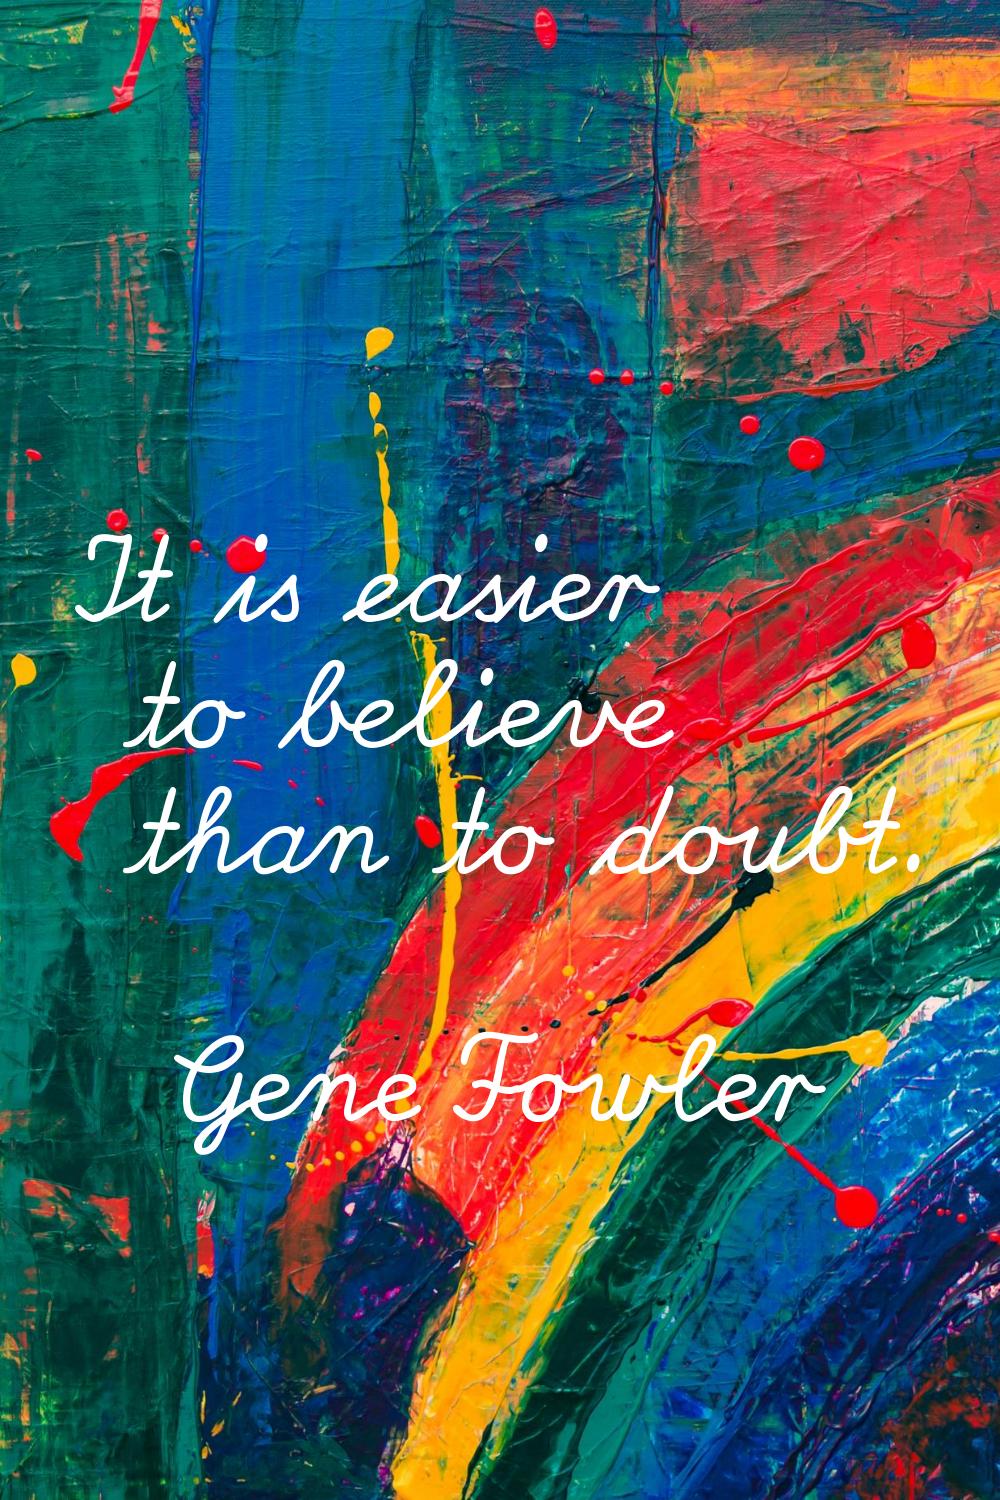 It is easier to believe than to doubt.